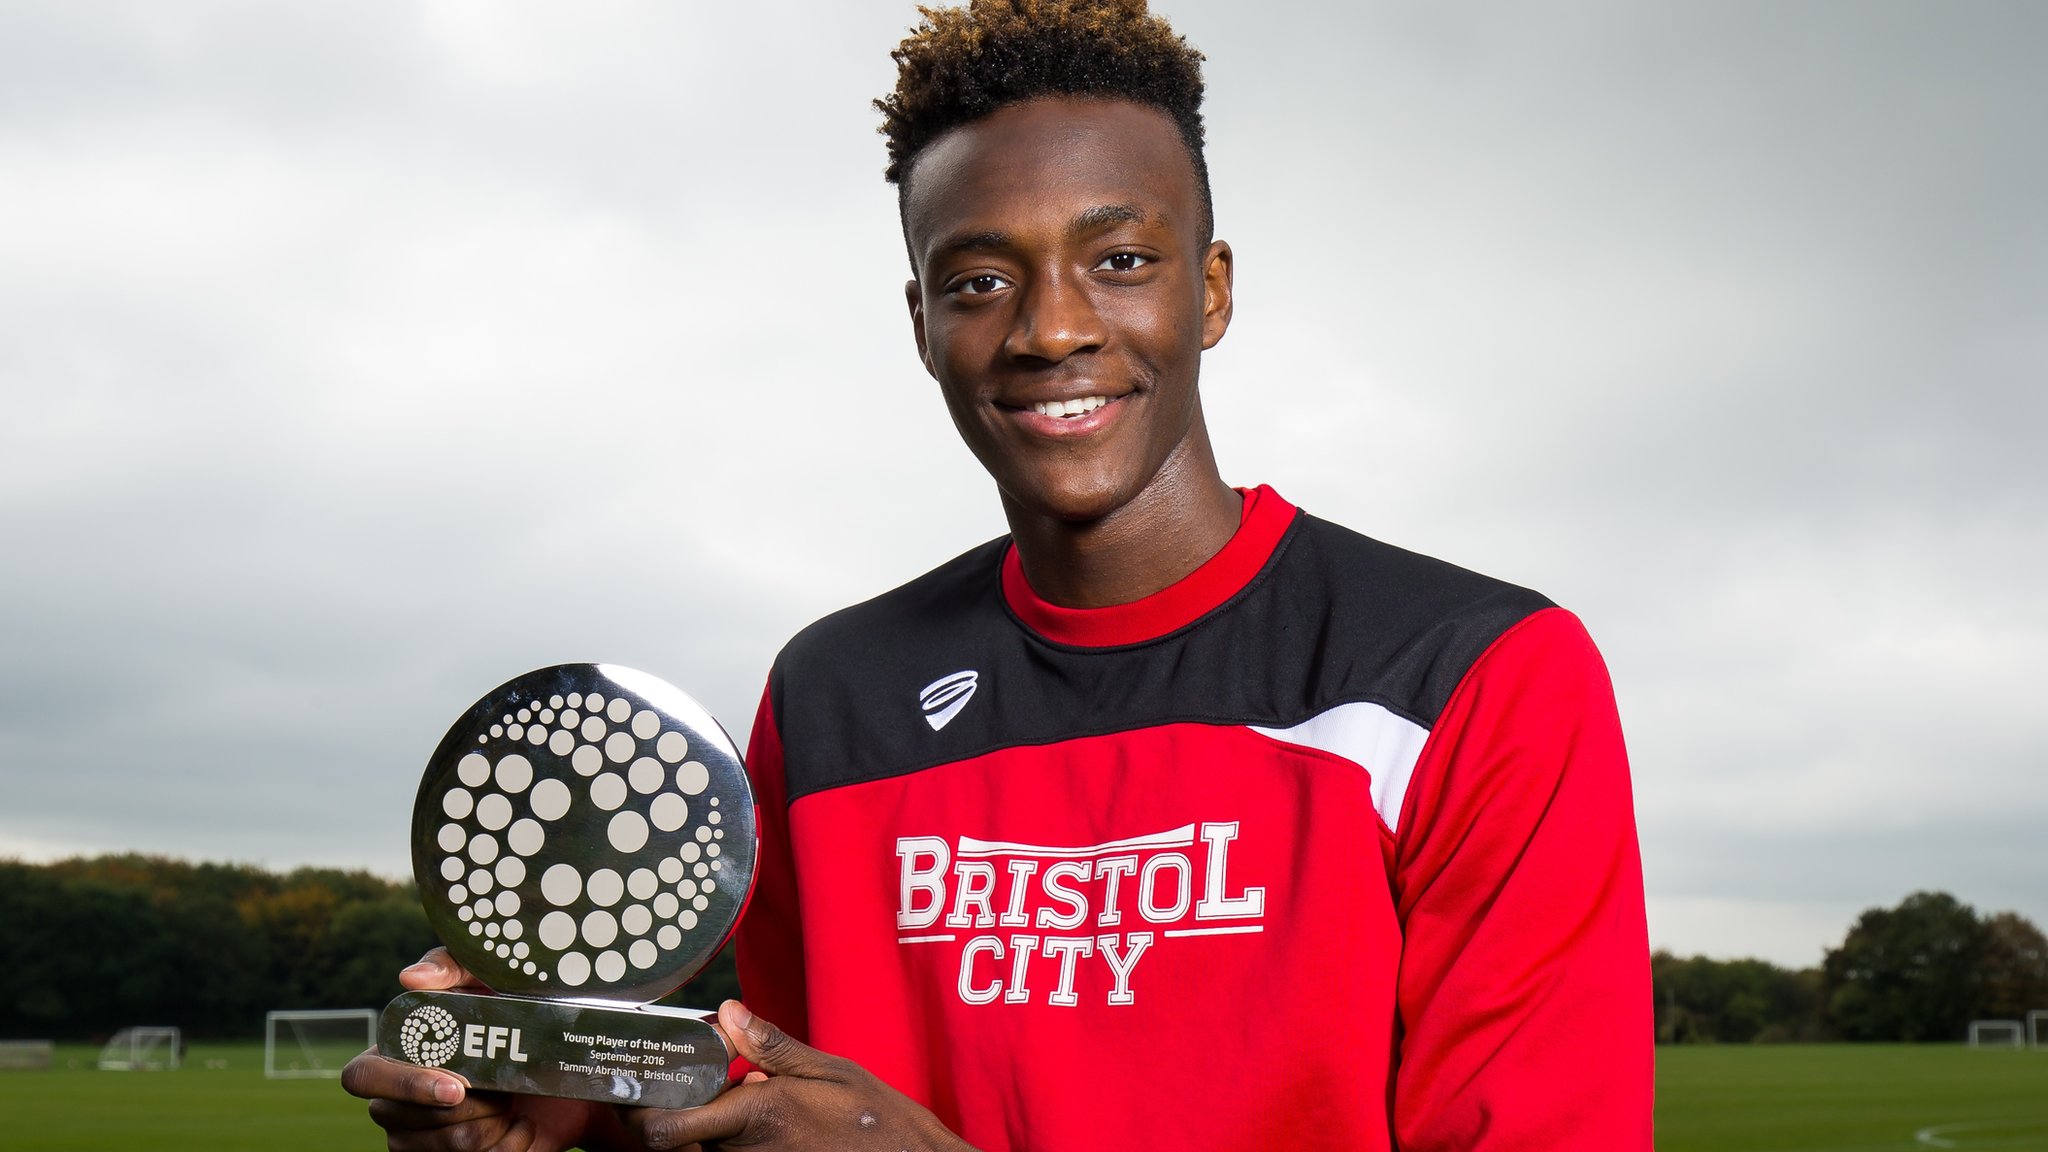 Player Focus – The Curious Case of One Tammy Abraham